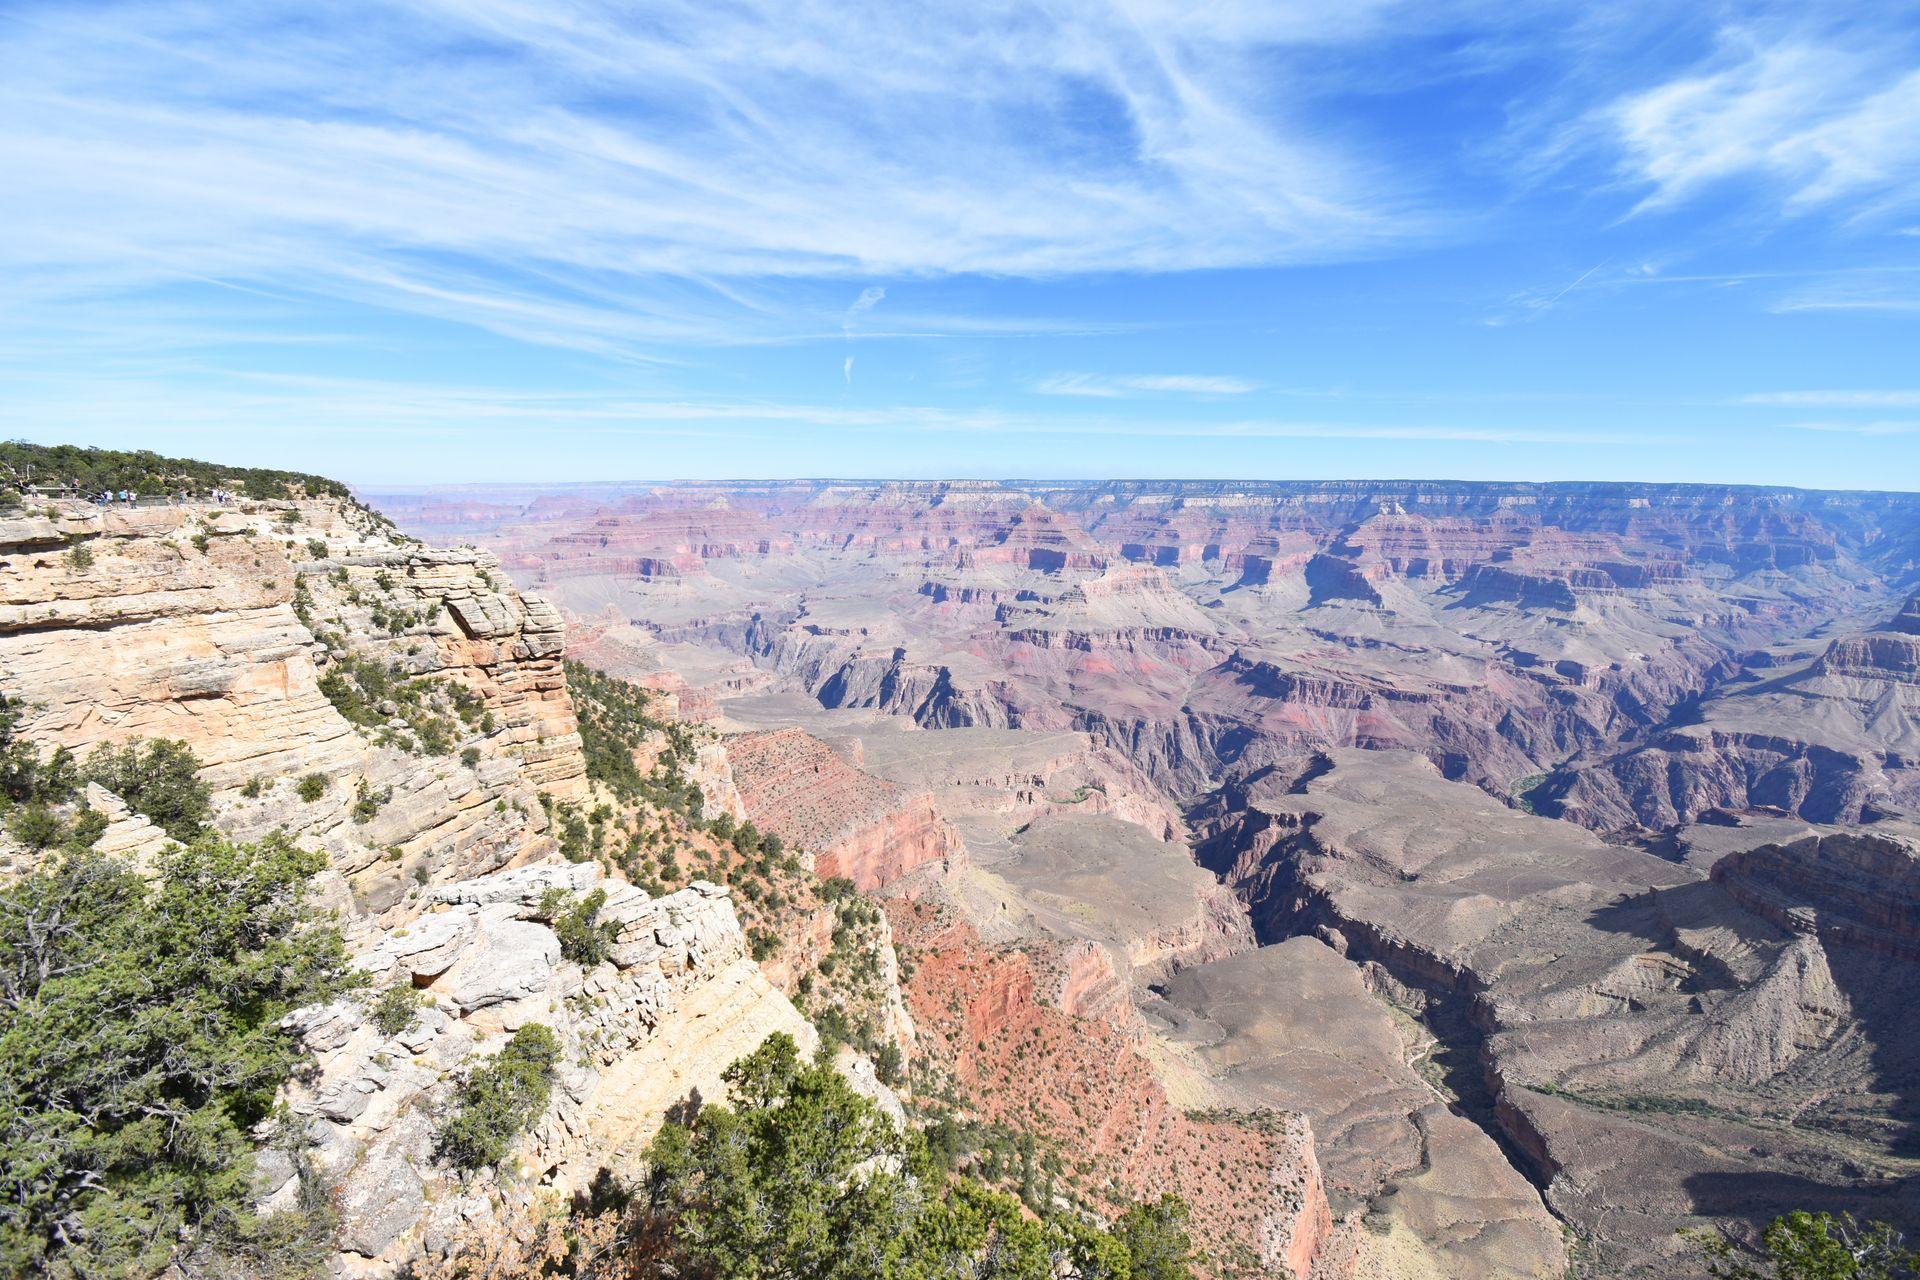 A view looking into the Grand Canyon from the South Rim.